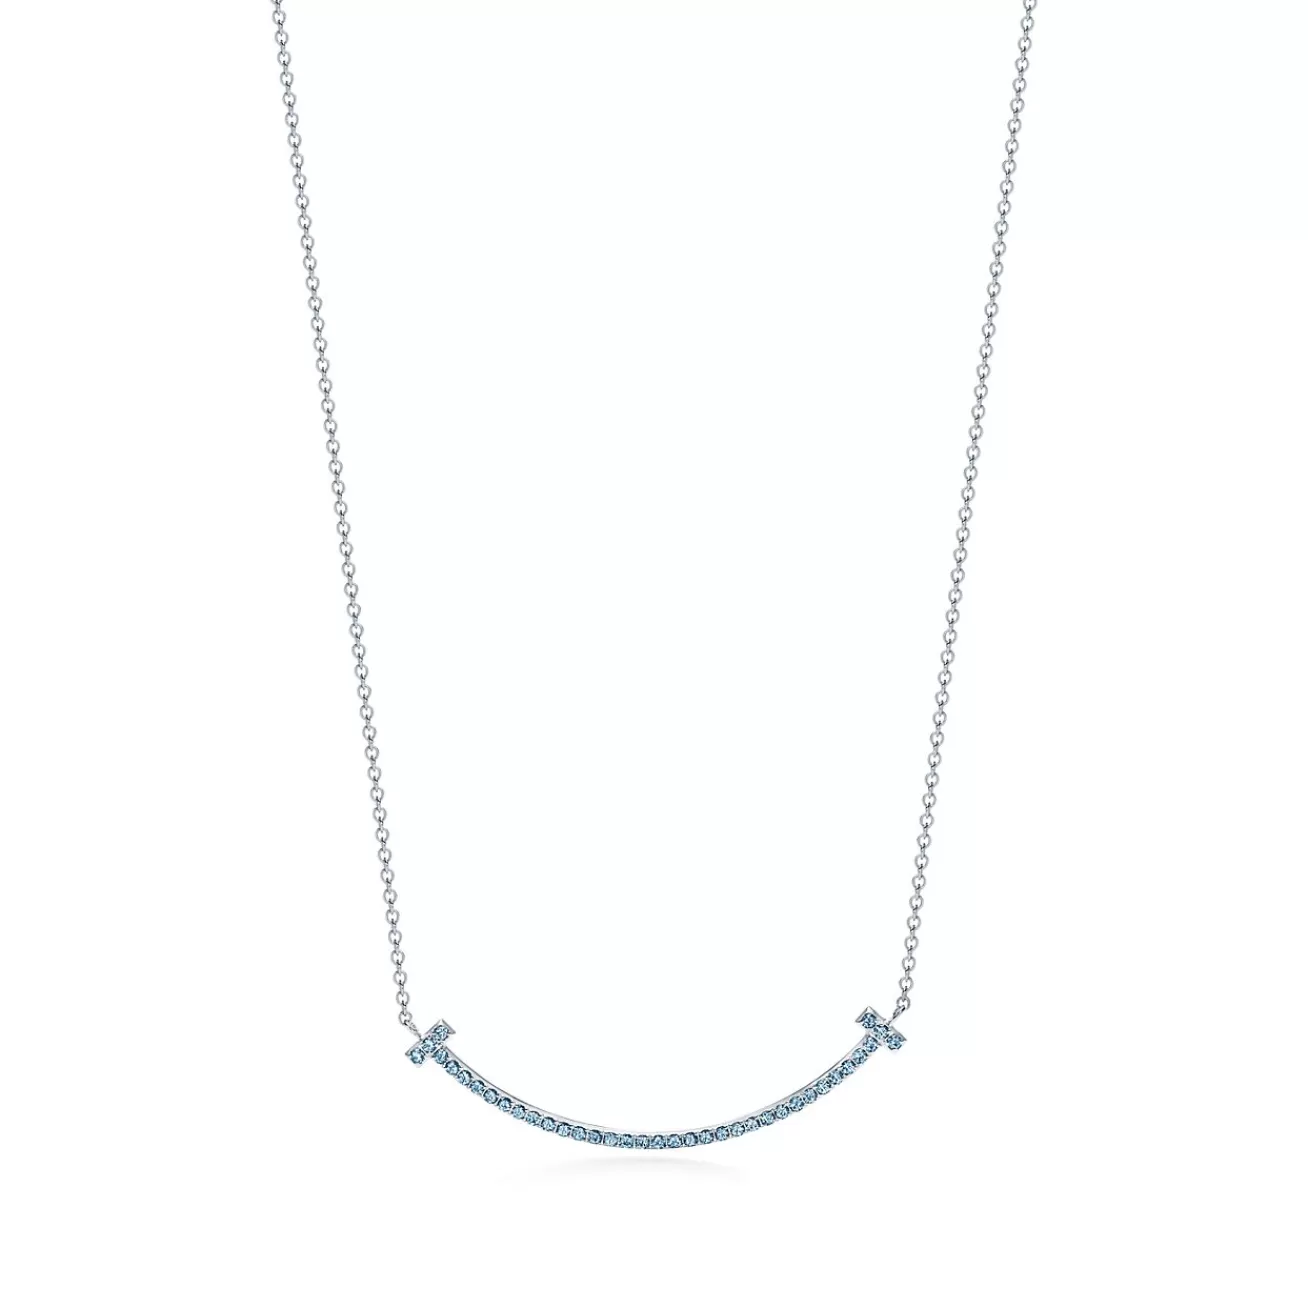 Tiffany & Co. Tiffany T smile pendant in 18k white gold with blue topazes, small. | ^ Necklaces & Pendants | Colored Gemstone Jewelry